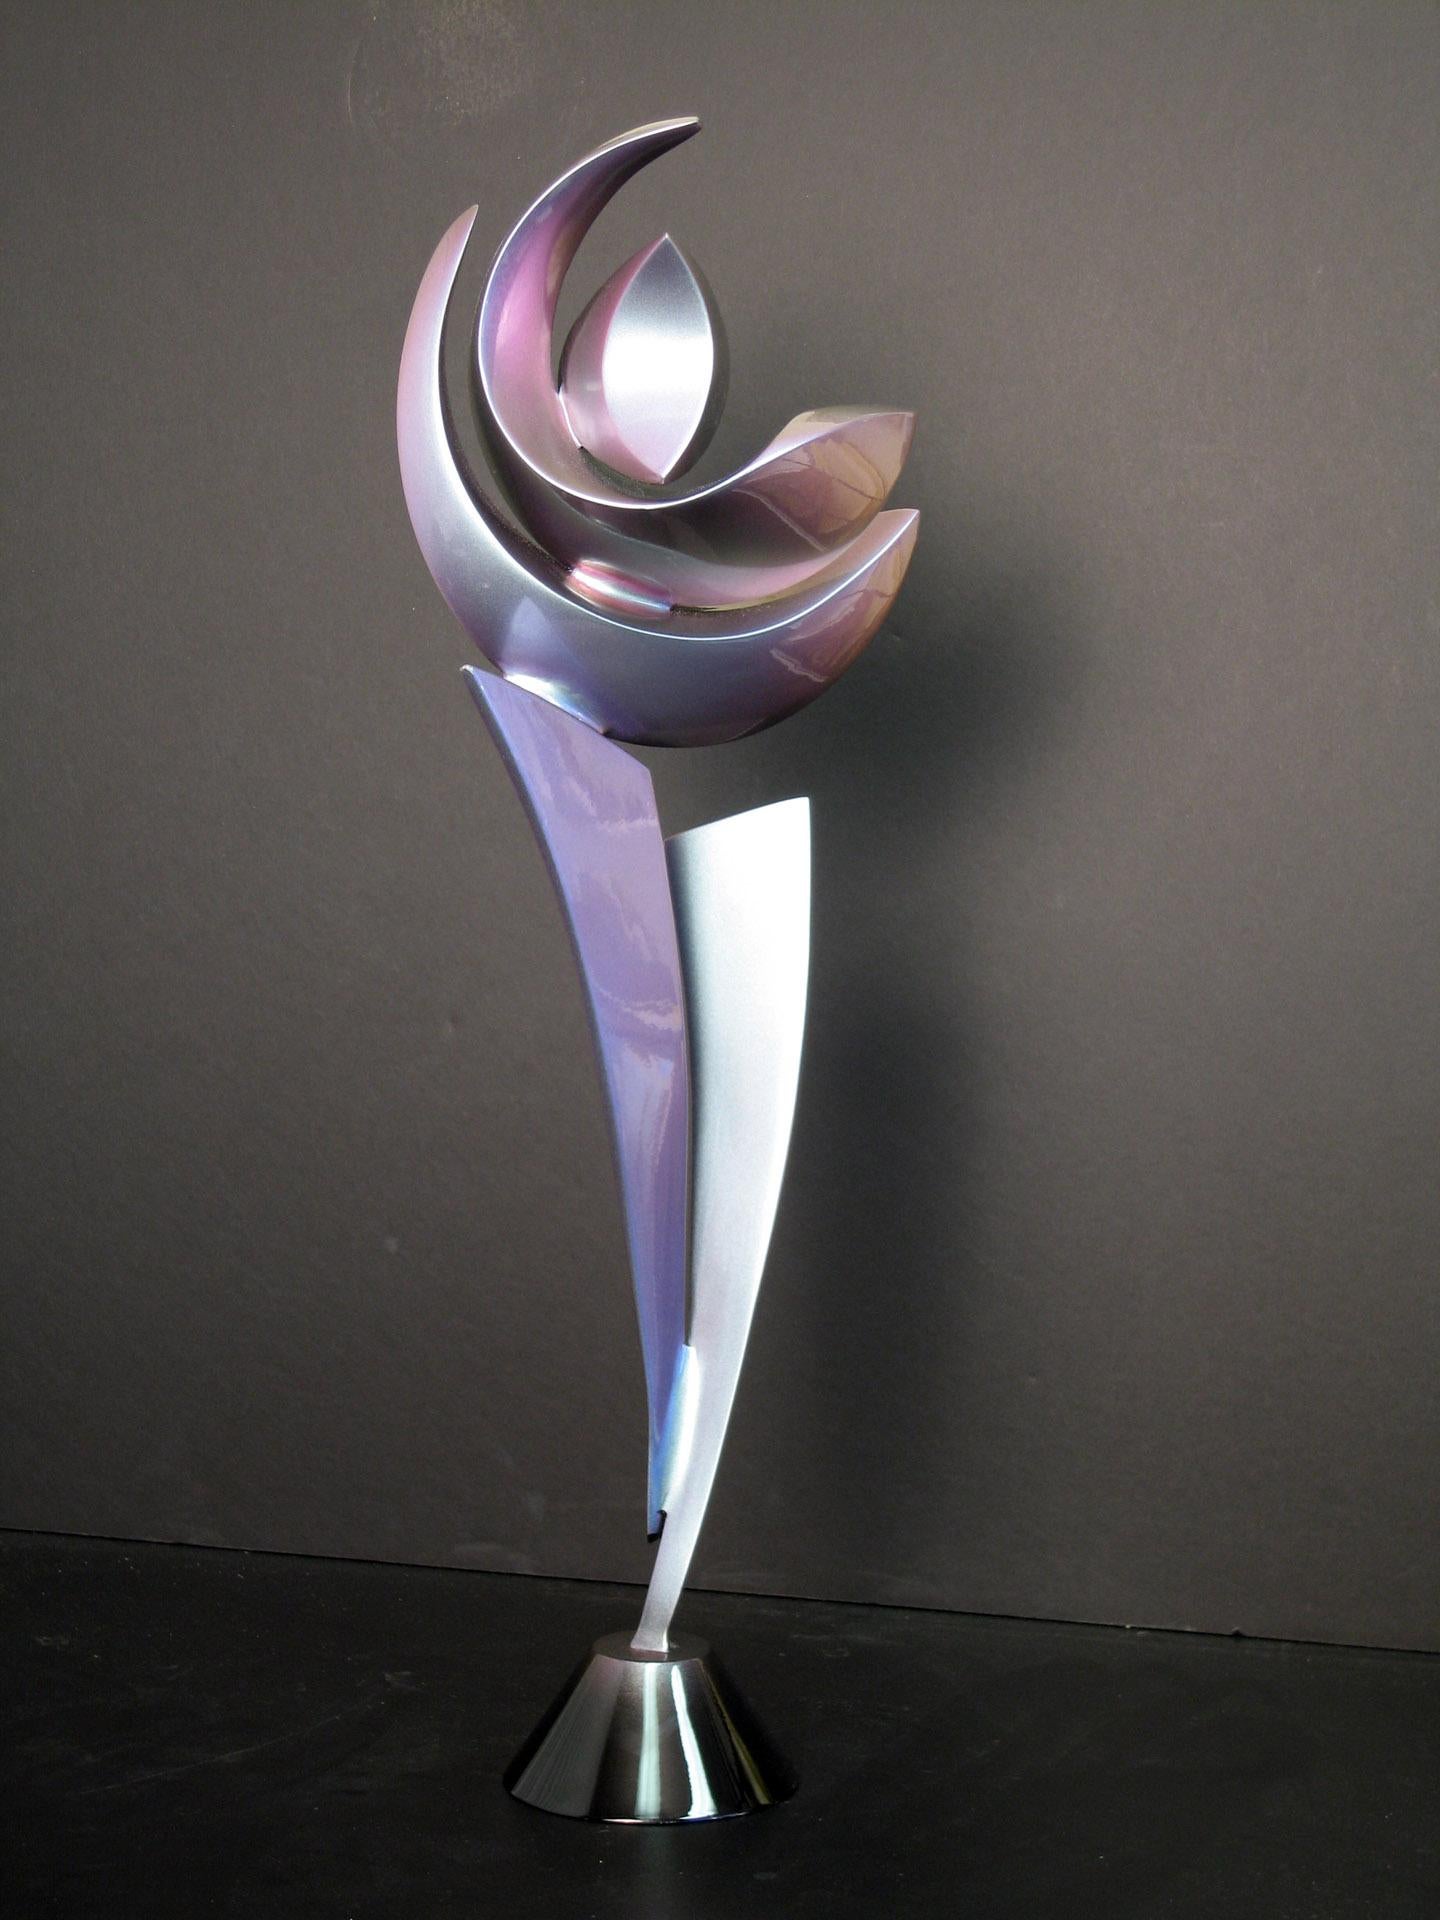 5 unique forms combine in this sculpture in a style best described as anthropomorphic abstraction.  This is an edition of 12 and is also available with a color shift paint seen in the last two images.